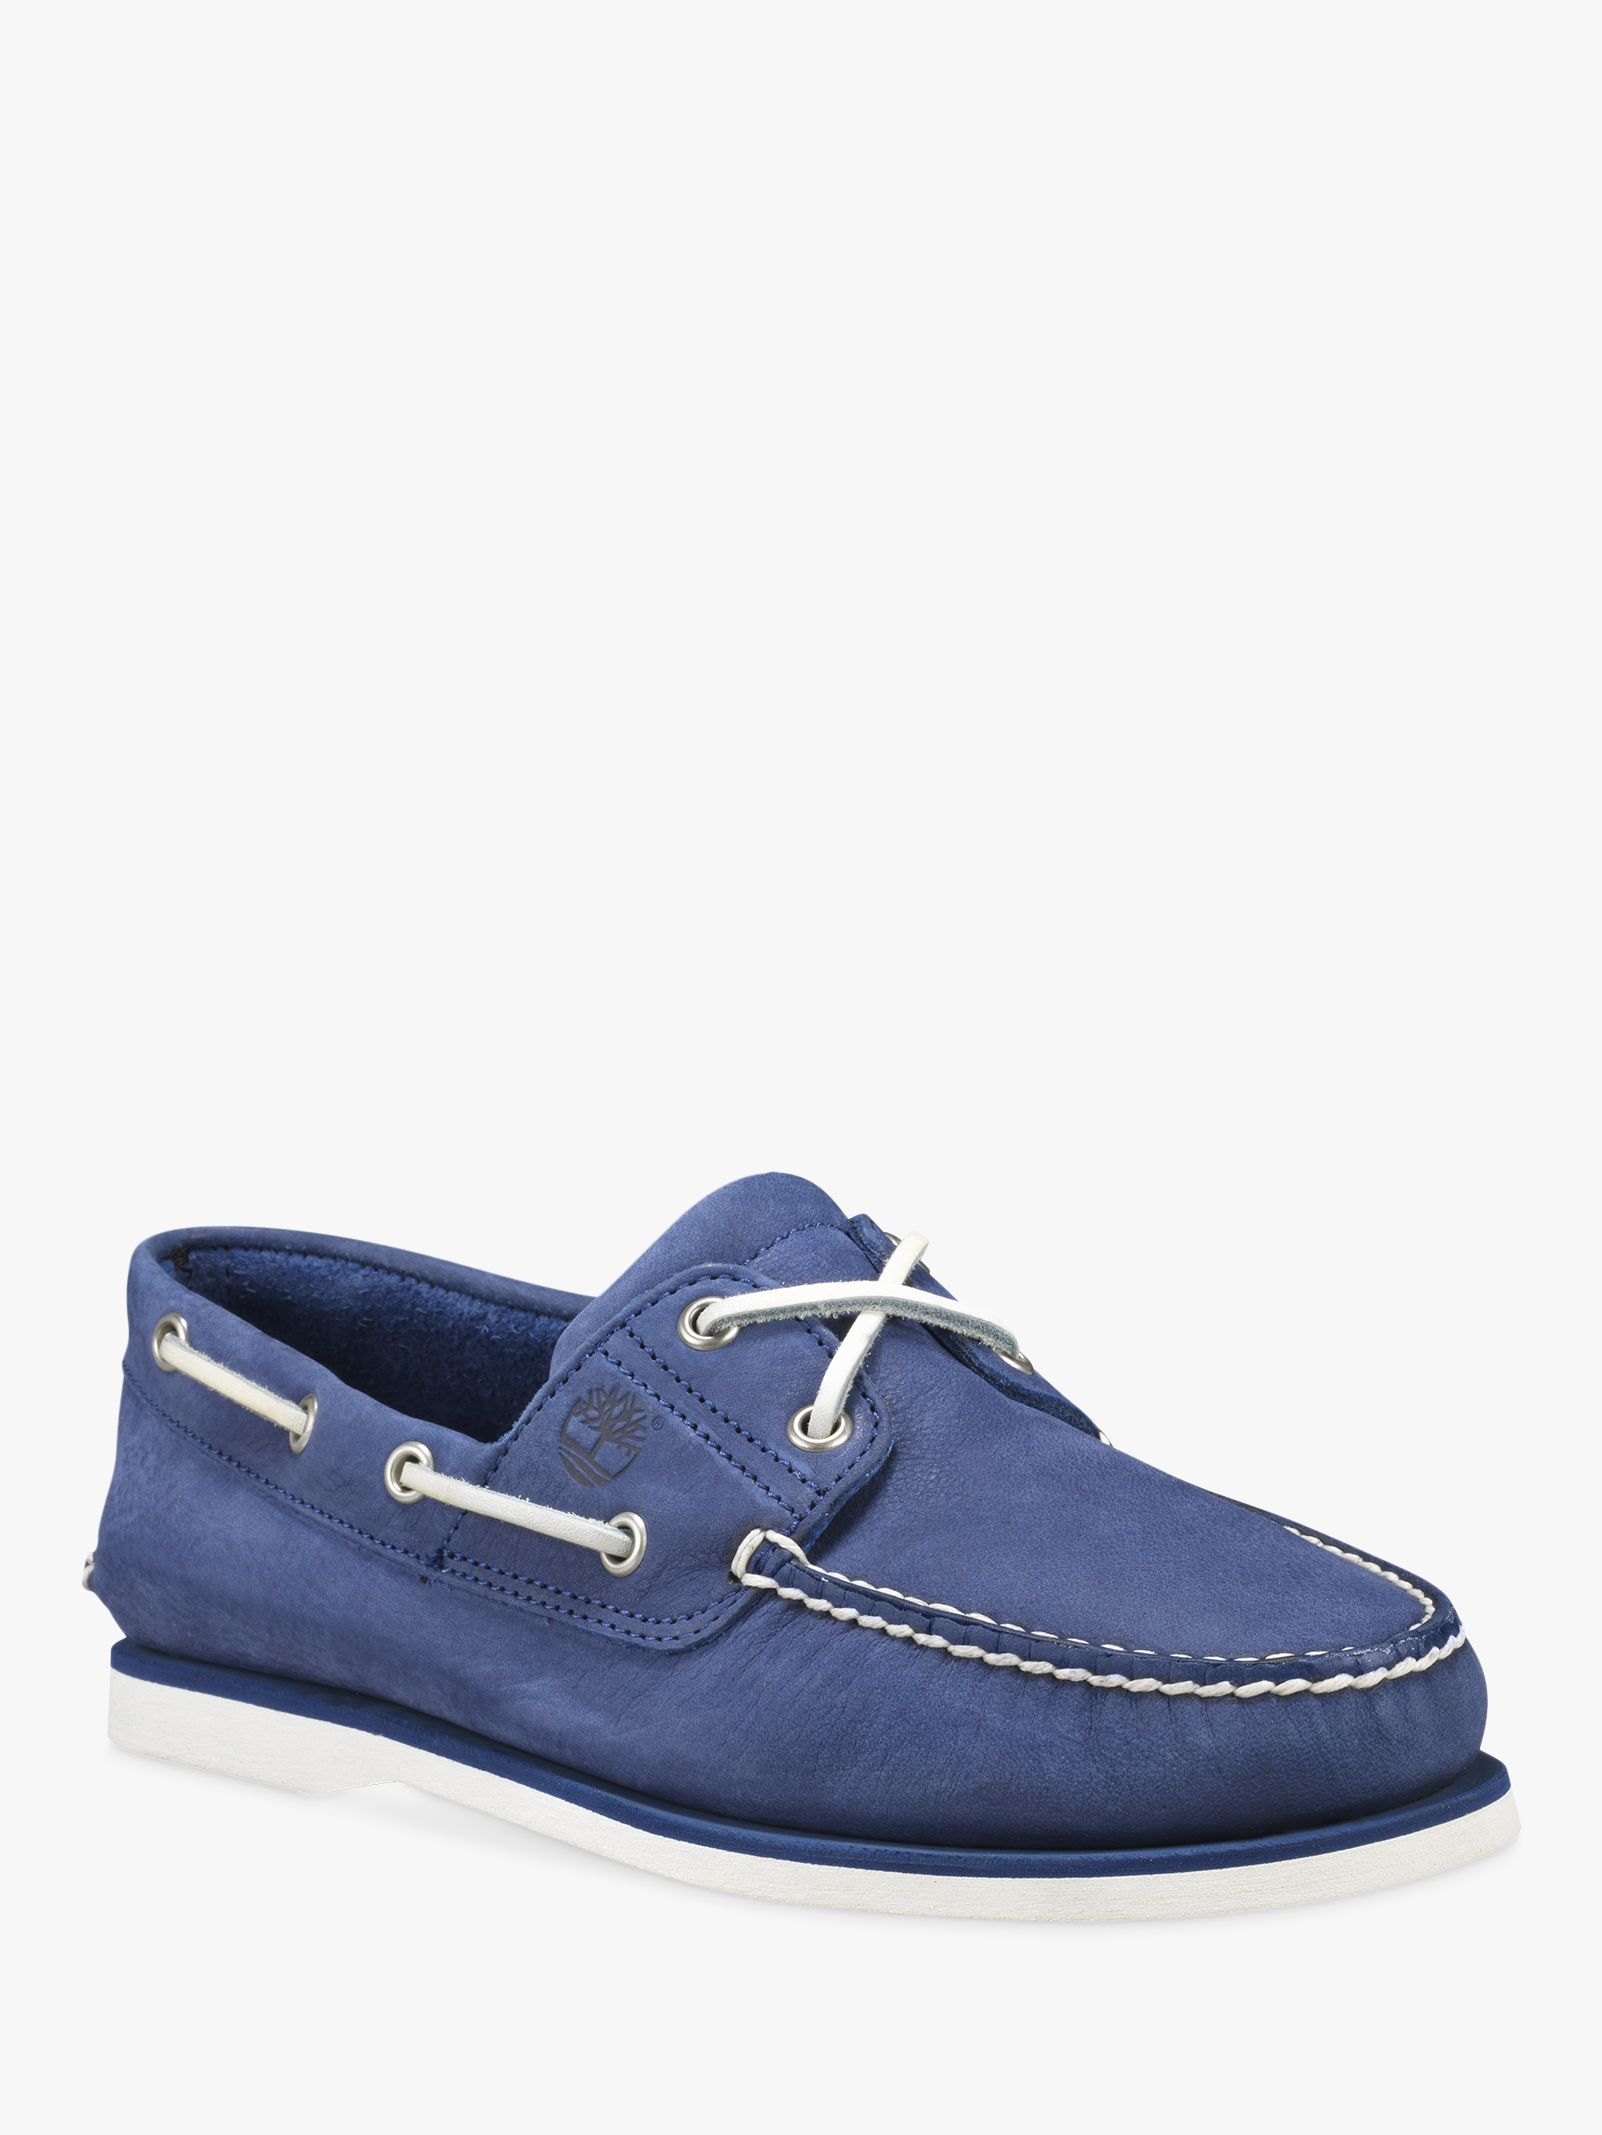 timberland boat shoes blue